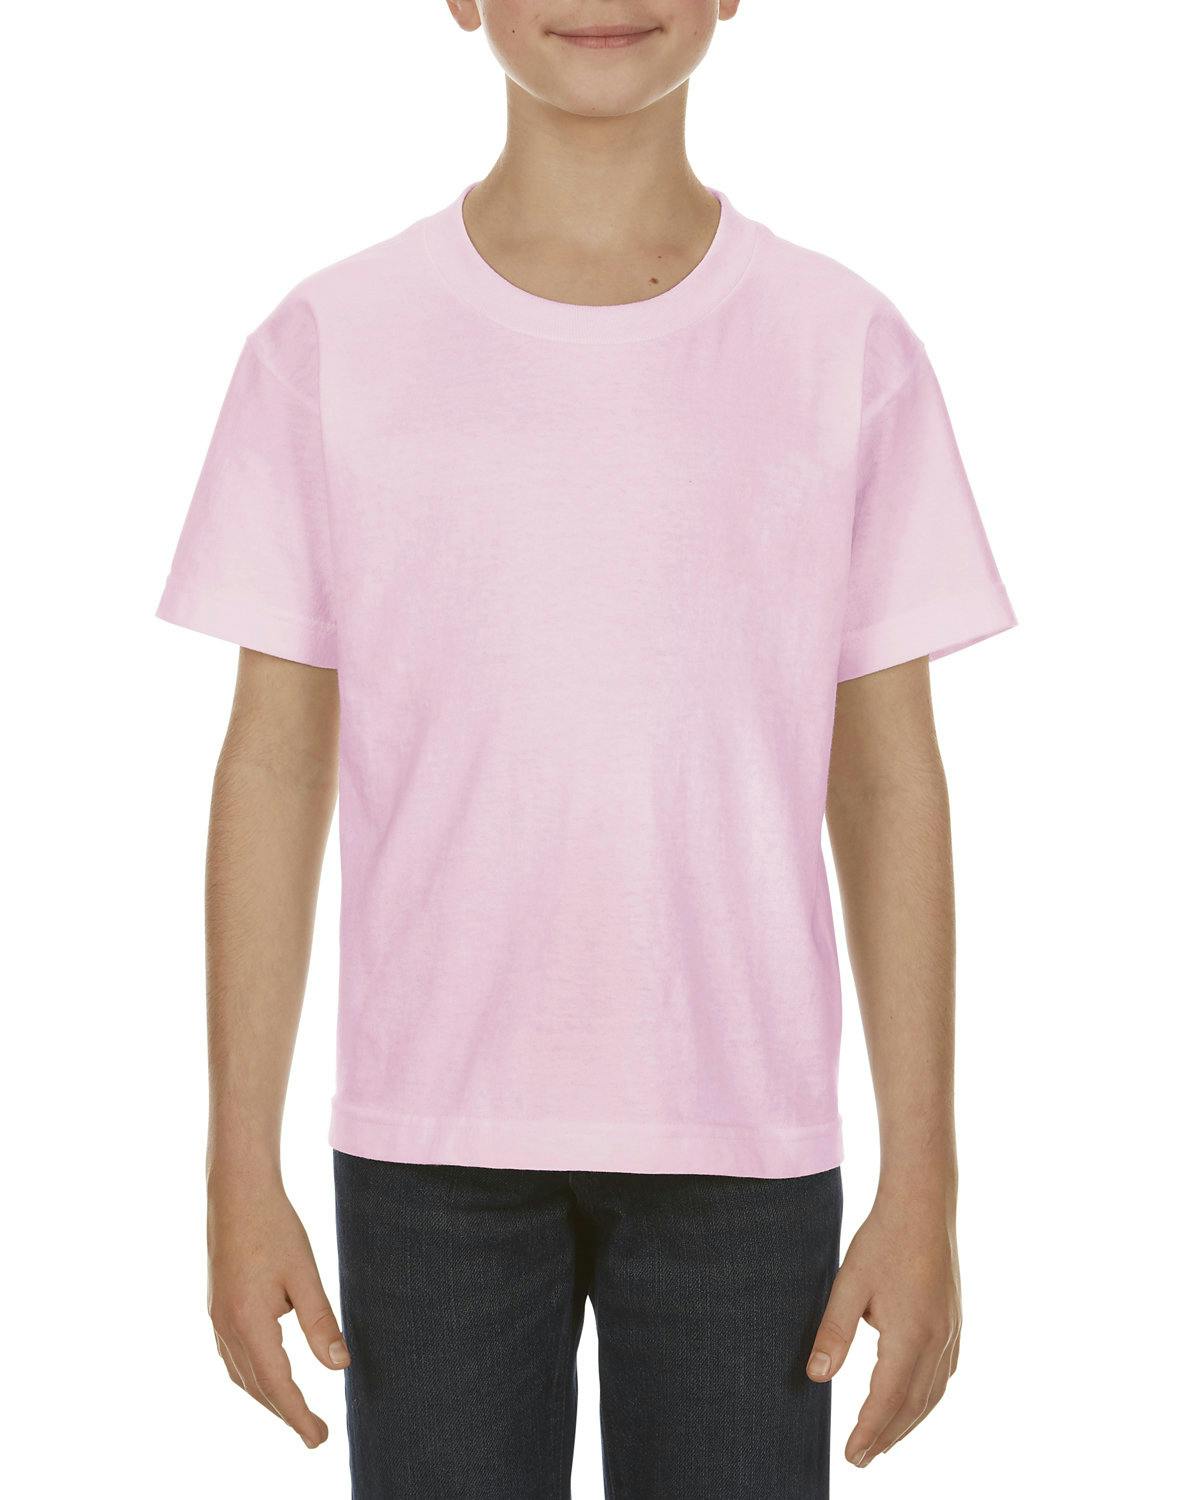 Image for Youth 6.0 oz., 100% Cotton T-Shirt